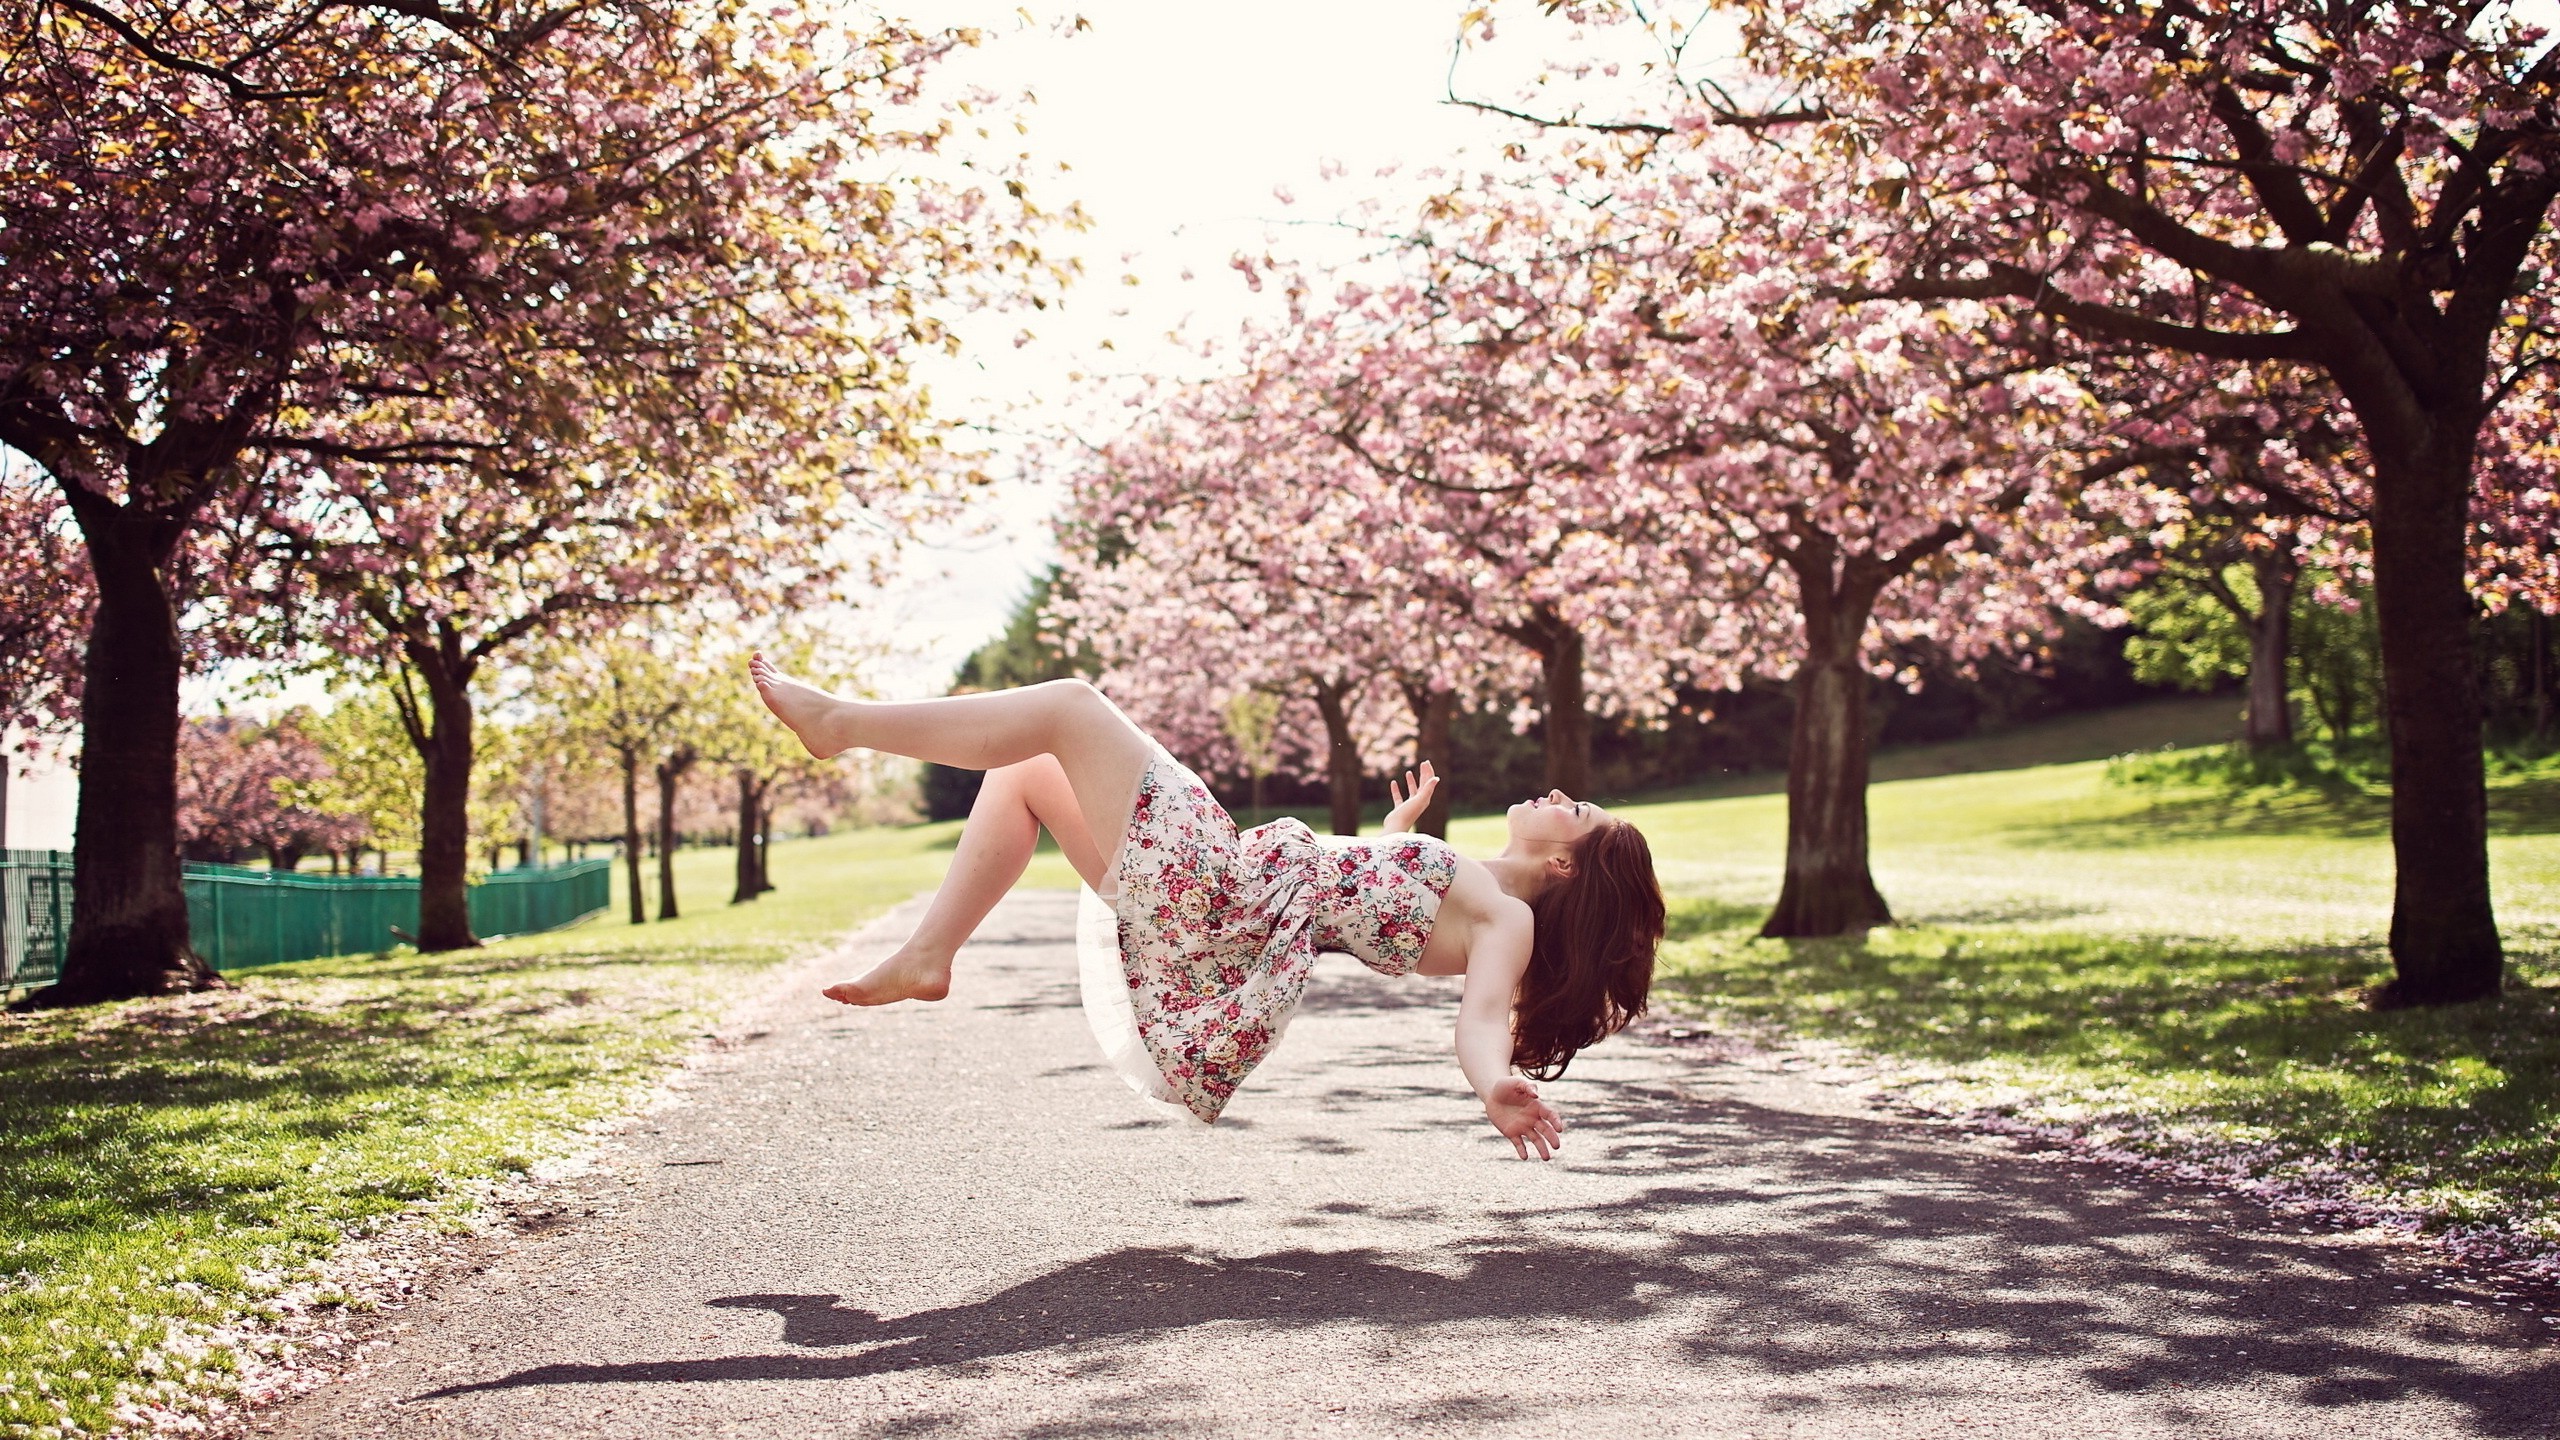 women, Model, Brunette, Long Hair, Flying, Floating, Women Outdoors, Trees, Road, Dress, Shadow, Magic, Grass, Park, Closed Eyes, Barefoot, Bare Shoulders, Open Mouth, Blossoms, Asian, Cherry Blossom Wallpaper